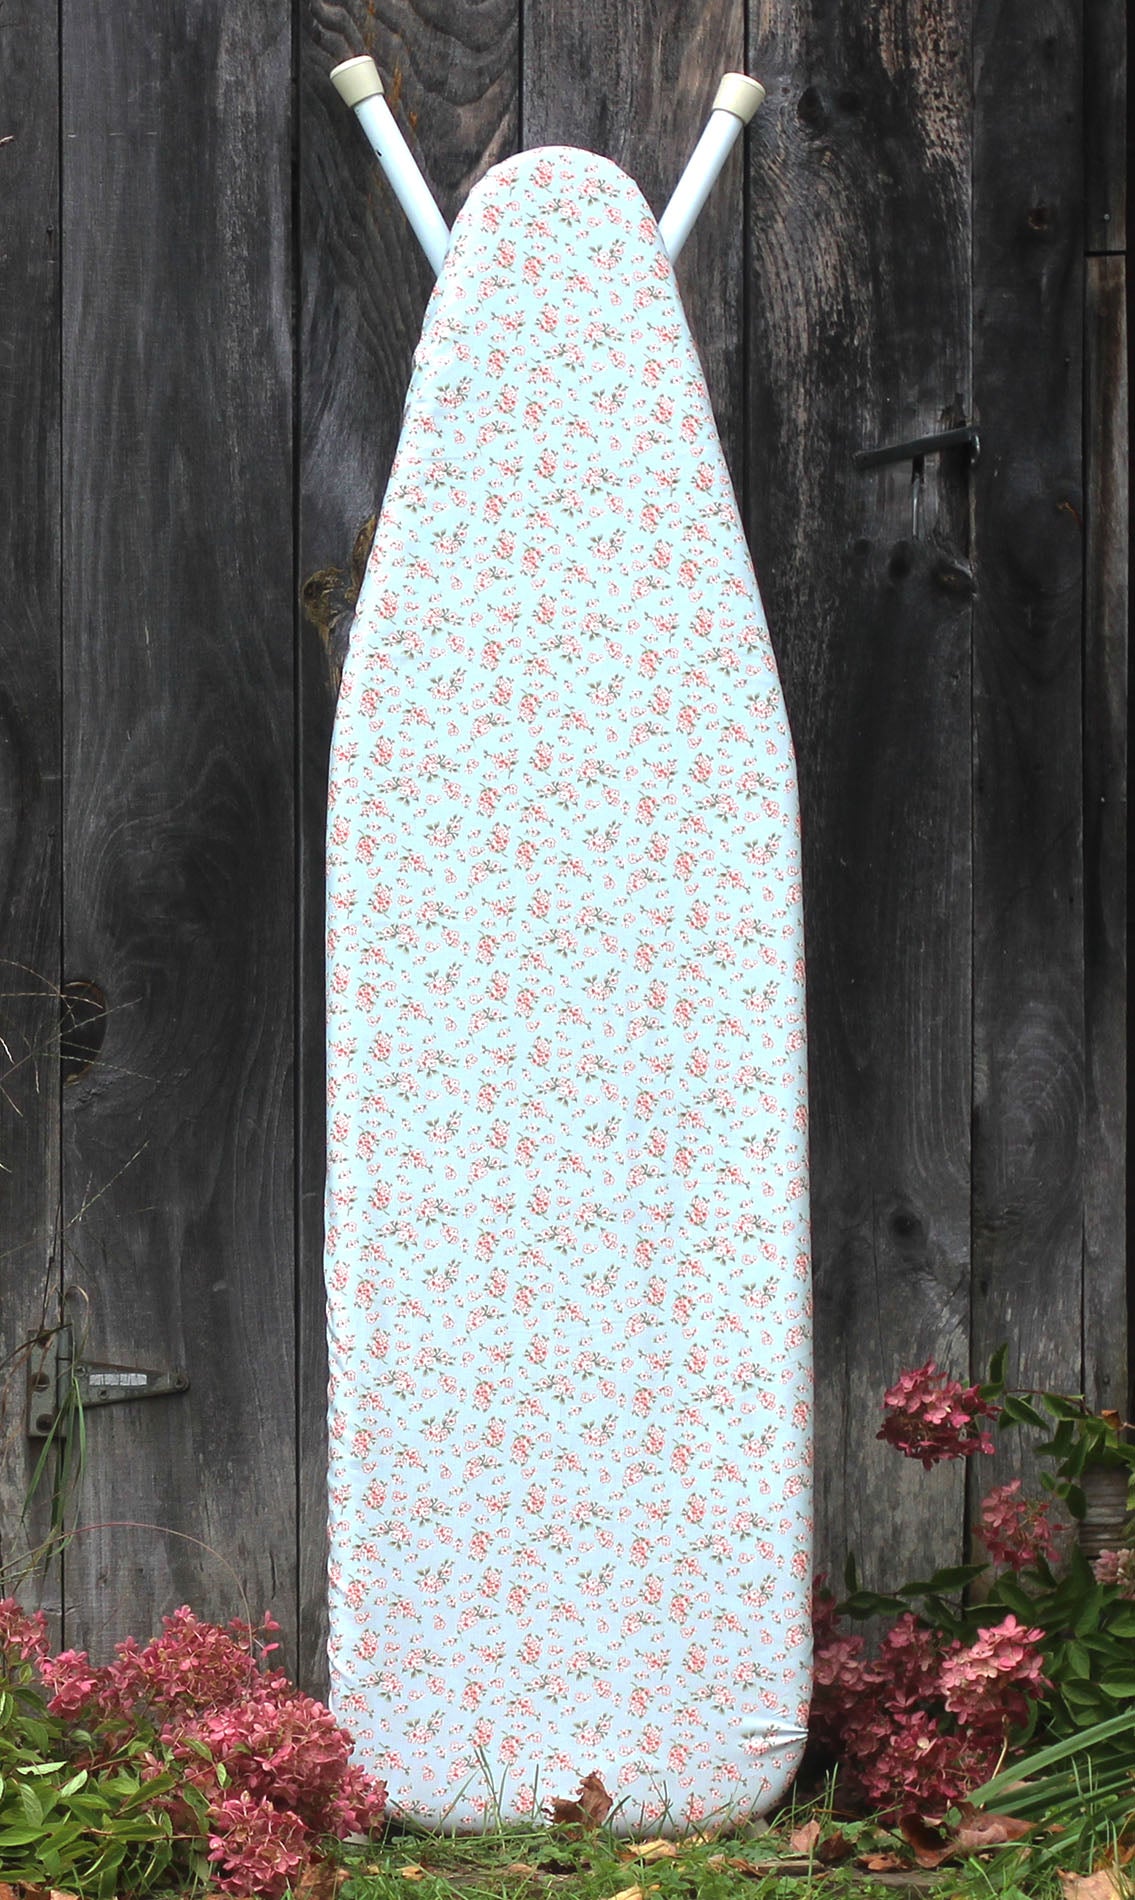 Ironing Board Cover #8